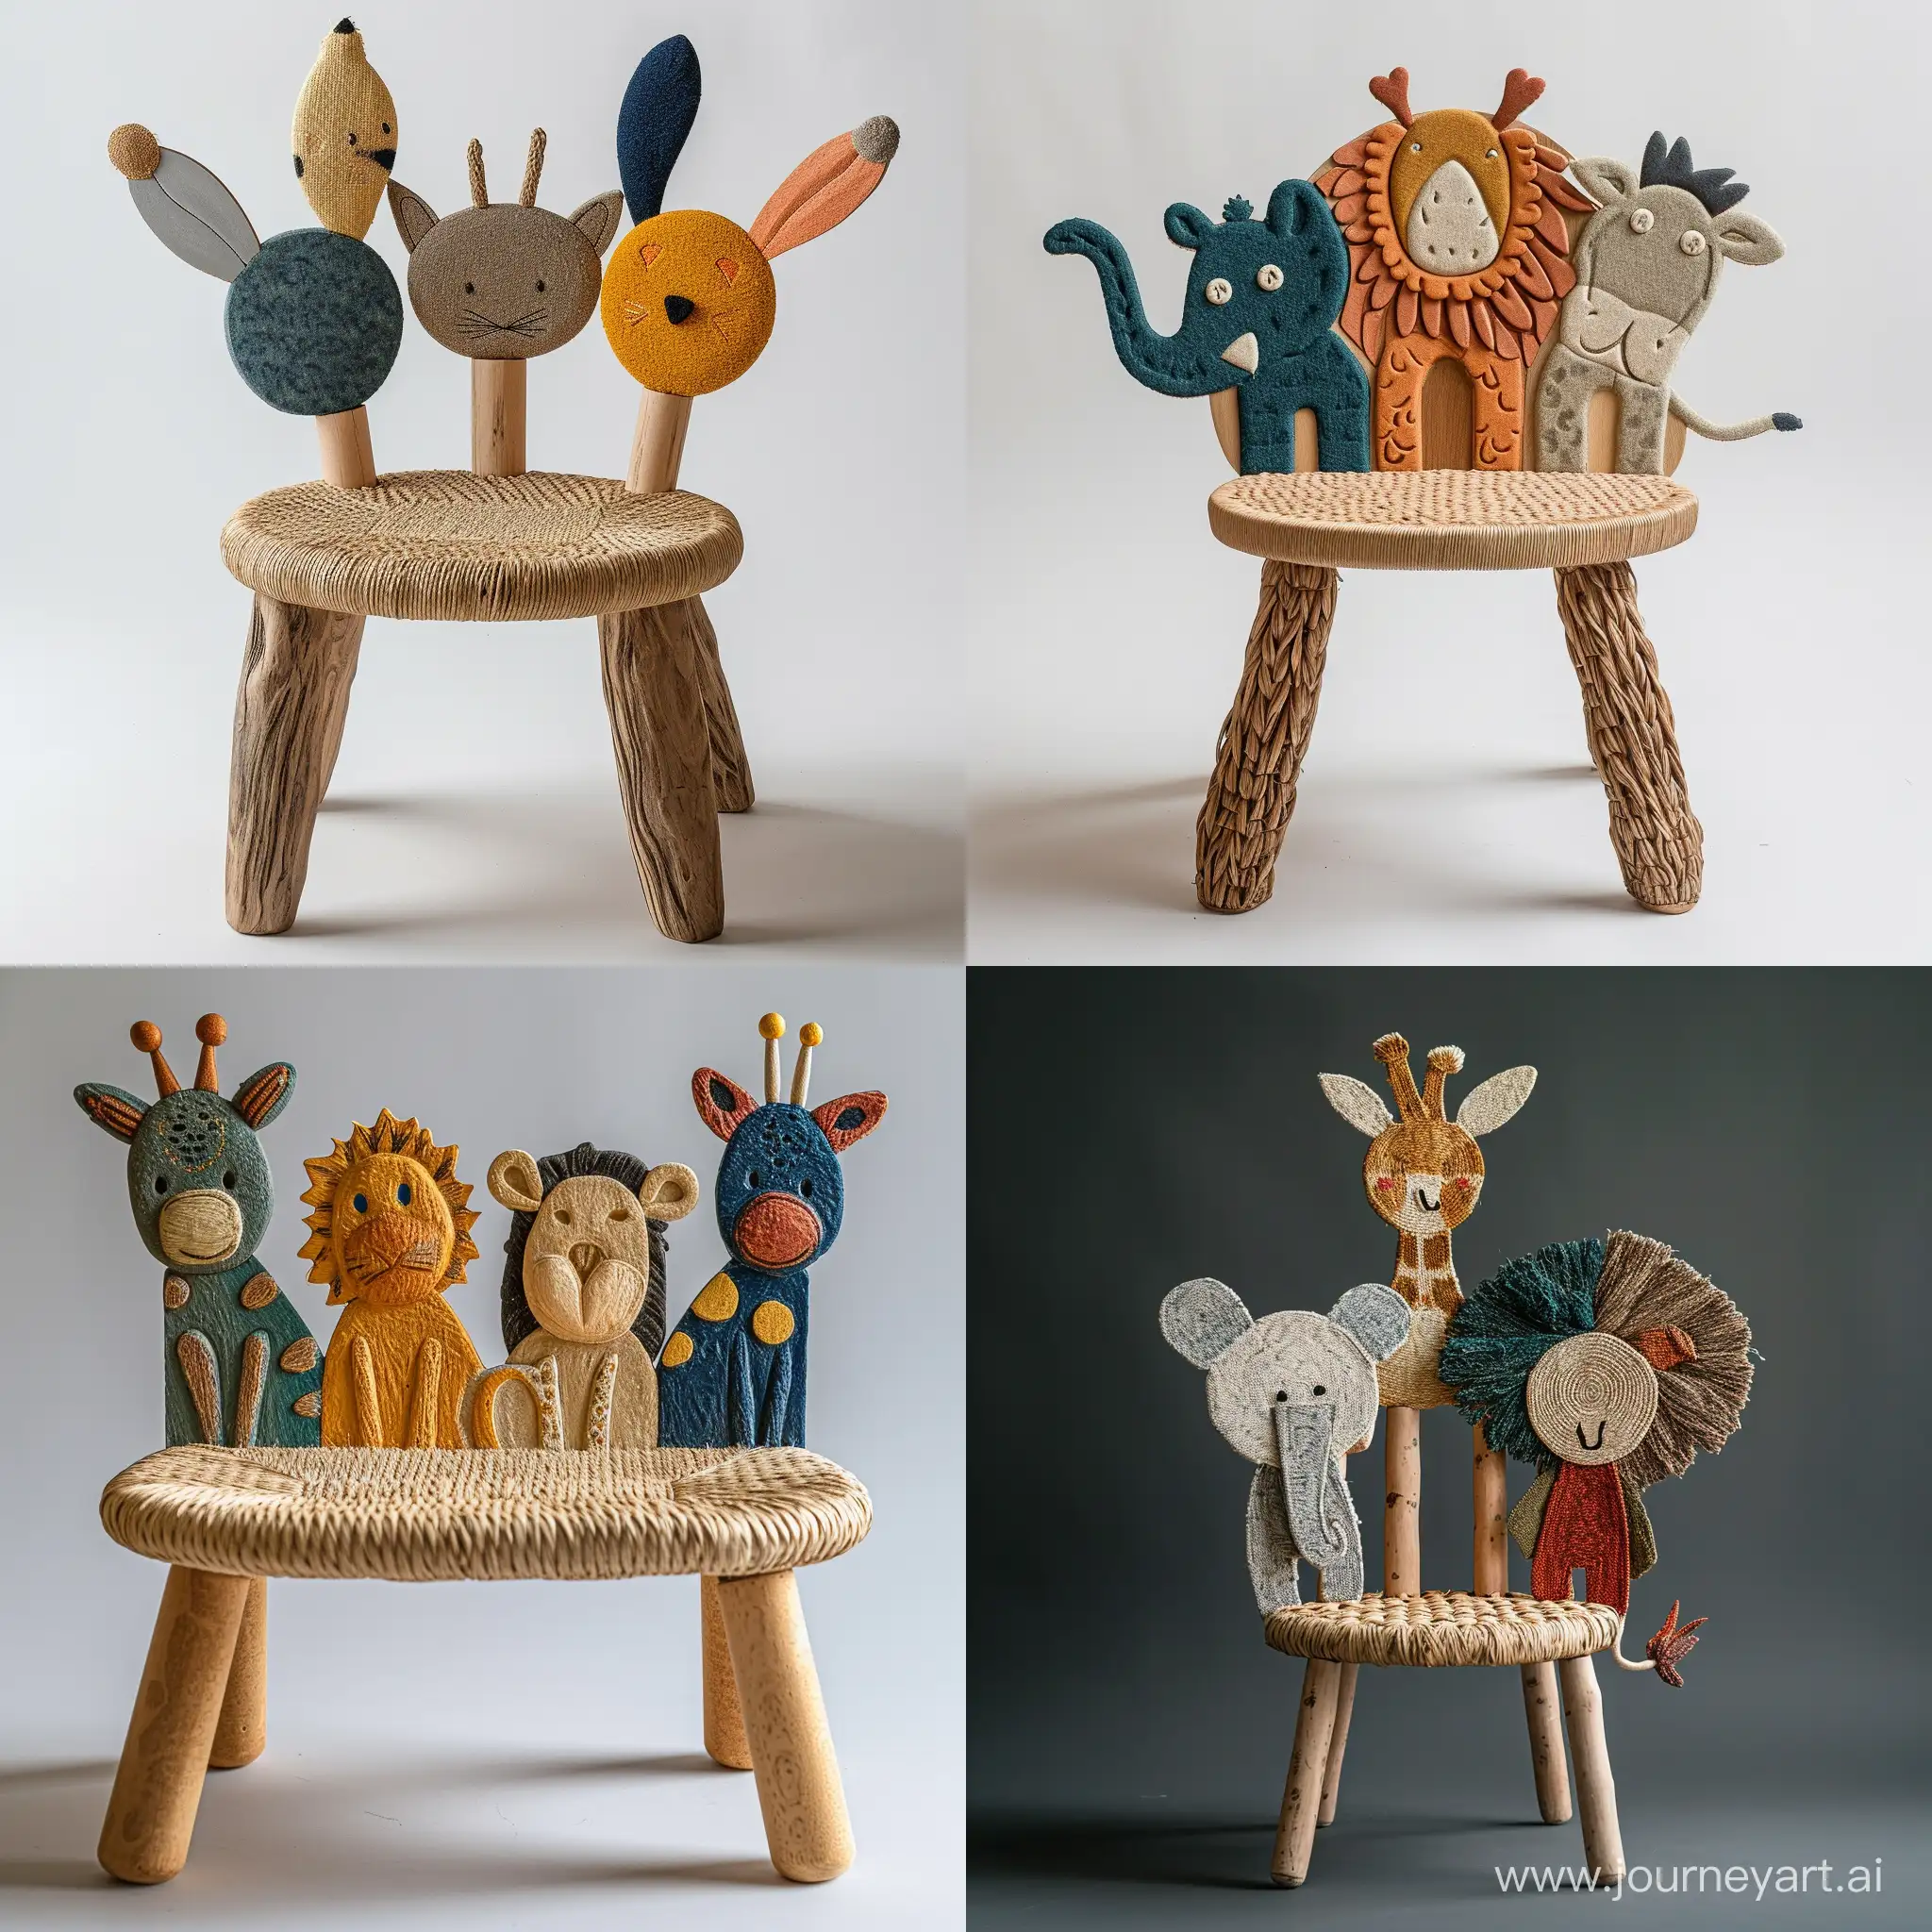 imagine an image of a sturdy children’s cute chair Elegant and using minimal materials for construction inspired by cute safari animals, with backrests shaped like different creatures. Use recycled wood for the frame and woven plant fibers for seating areas, depicted in colors representative of the chosen animals. The seat should stand approximately 30cm tall, built to educate about wildlife and ensure durability.realistic  style